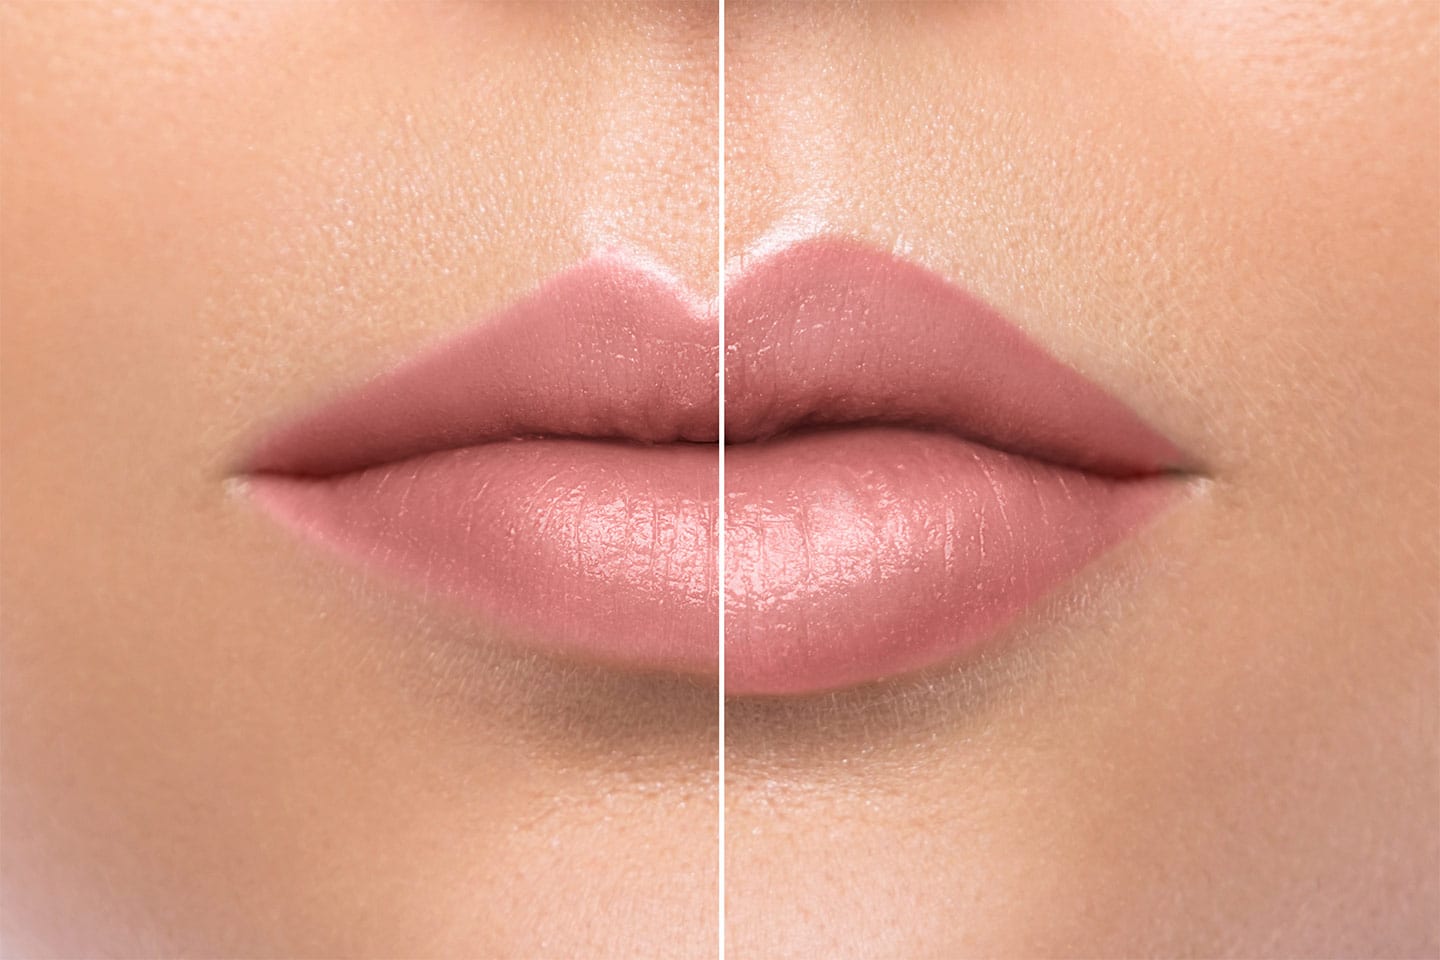 Lip Augmentation before and after picture